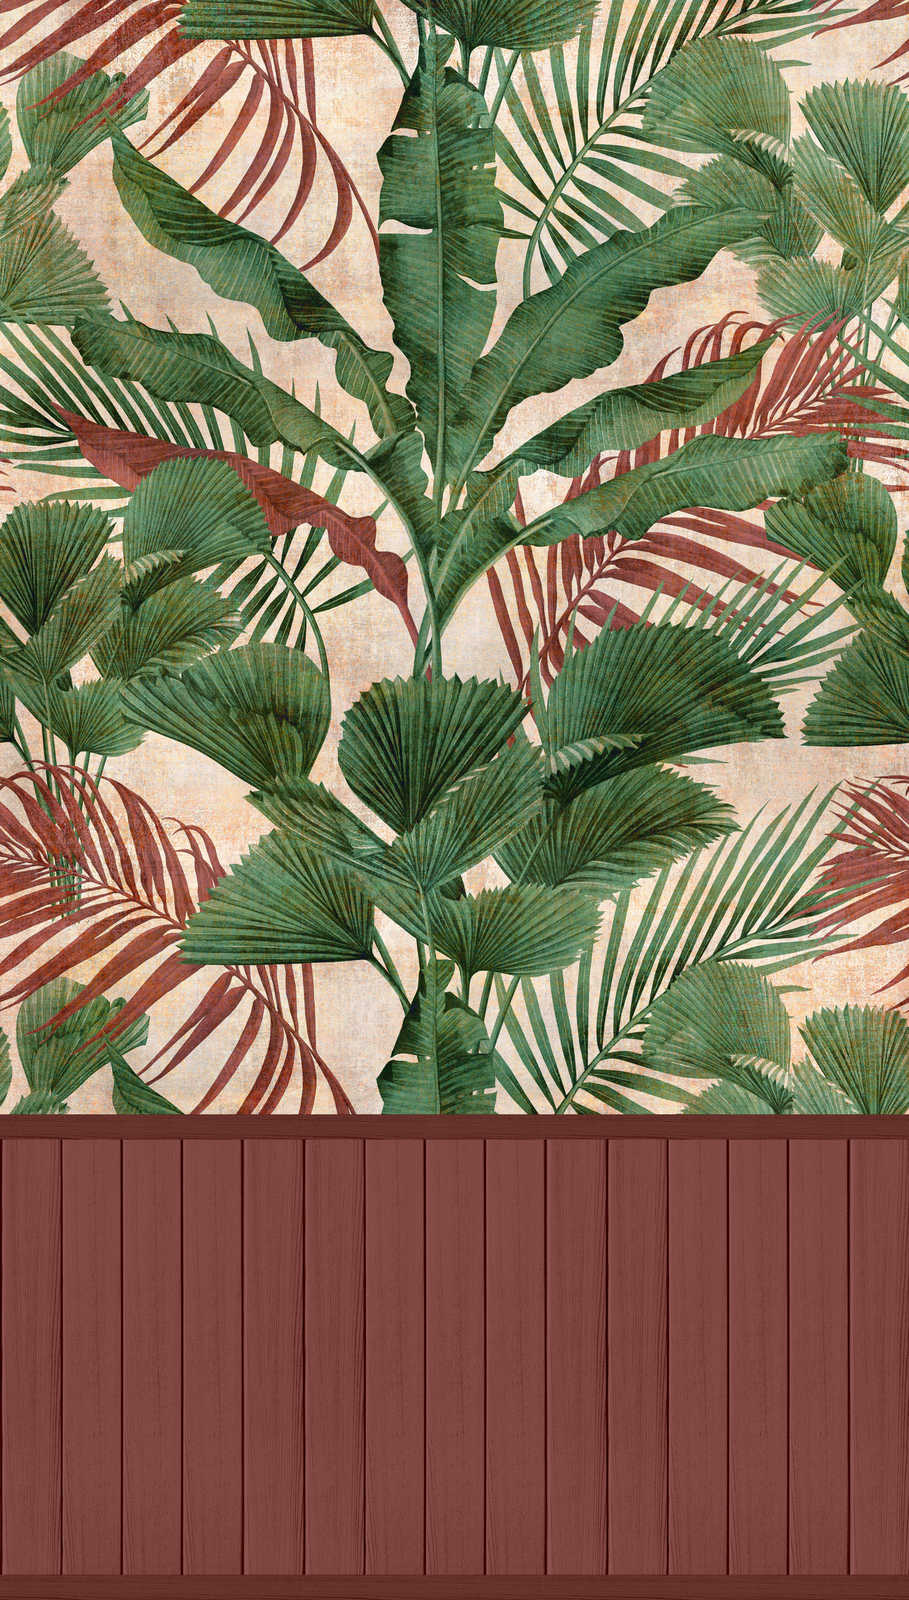             Non-woven motif wallpaper with wood-effect plinth border and jungle pattern - red, green, beige
        